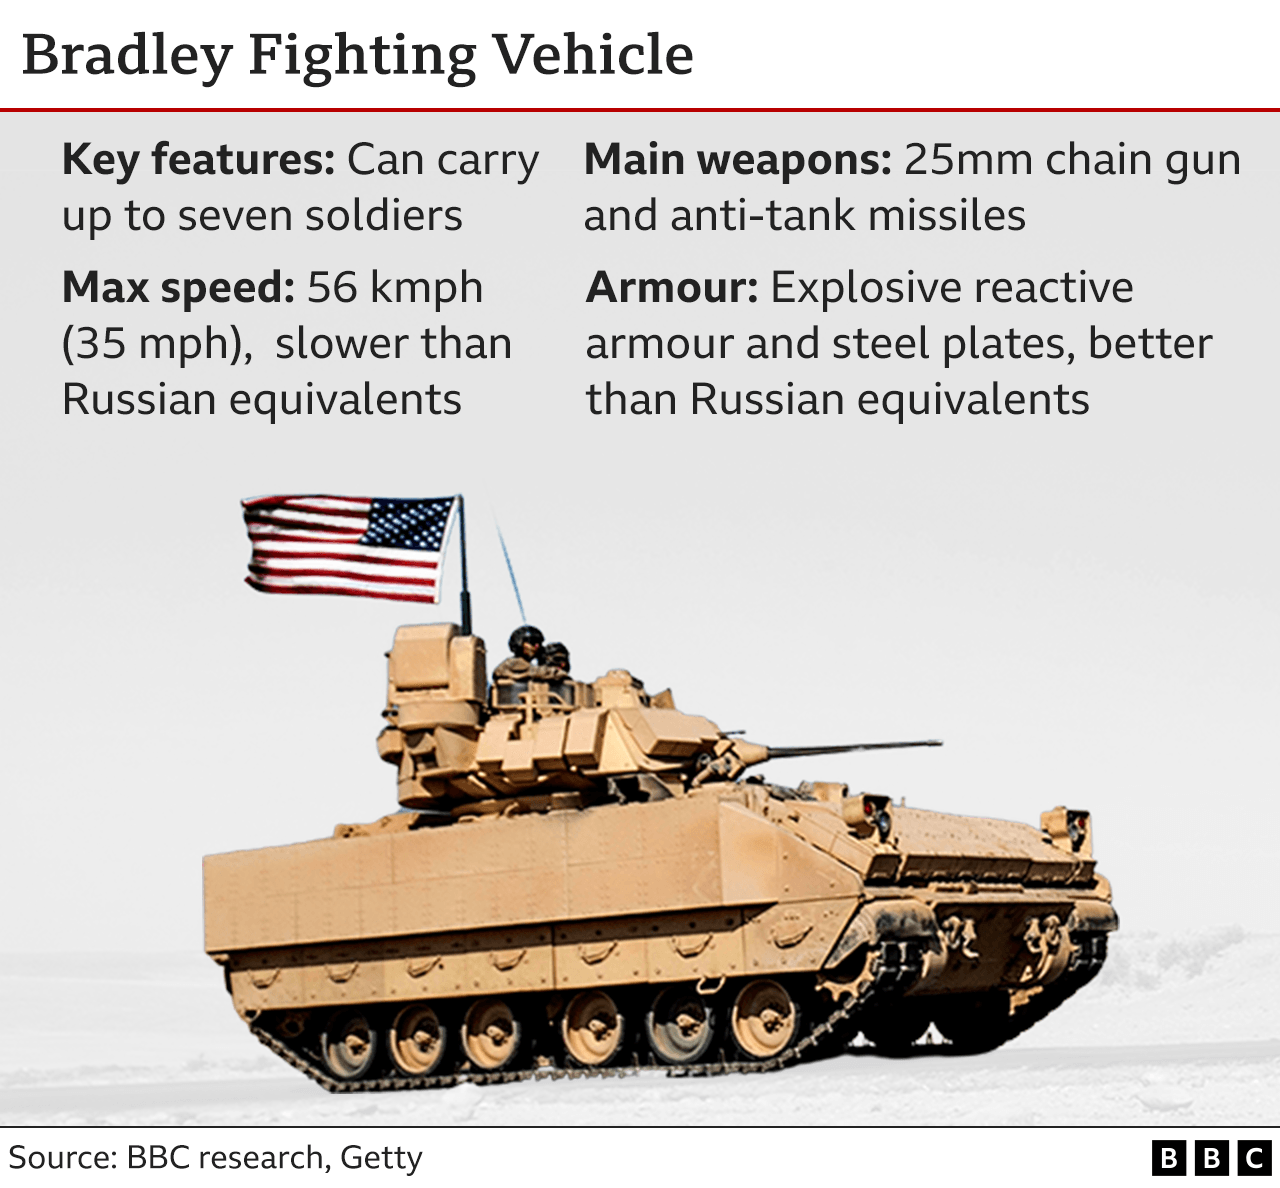 Characteristics of the Bradley Fighting Vehicle. The Bradley is heavier and better armoured than Russian equivalents. Its weapons include a 25mm chain gun and anti-tank missiles, making it effective against infantry, light and even heavily armoured vehicles.